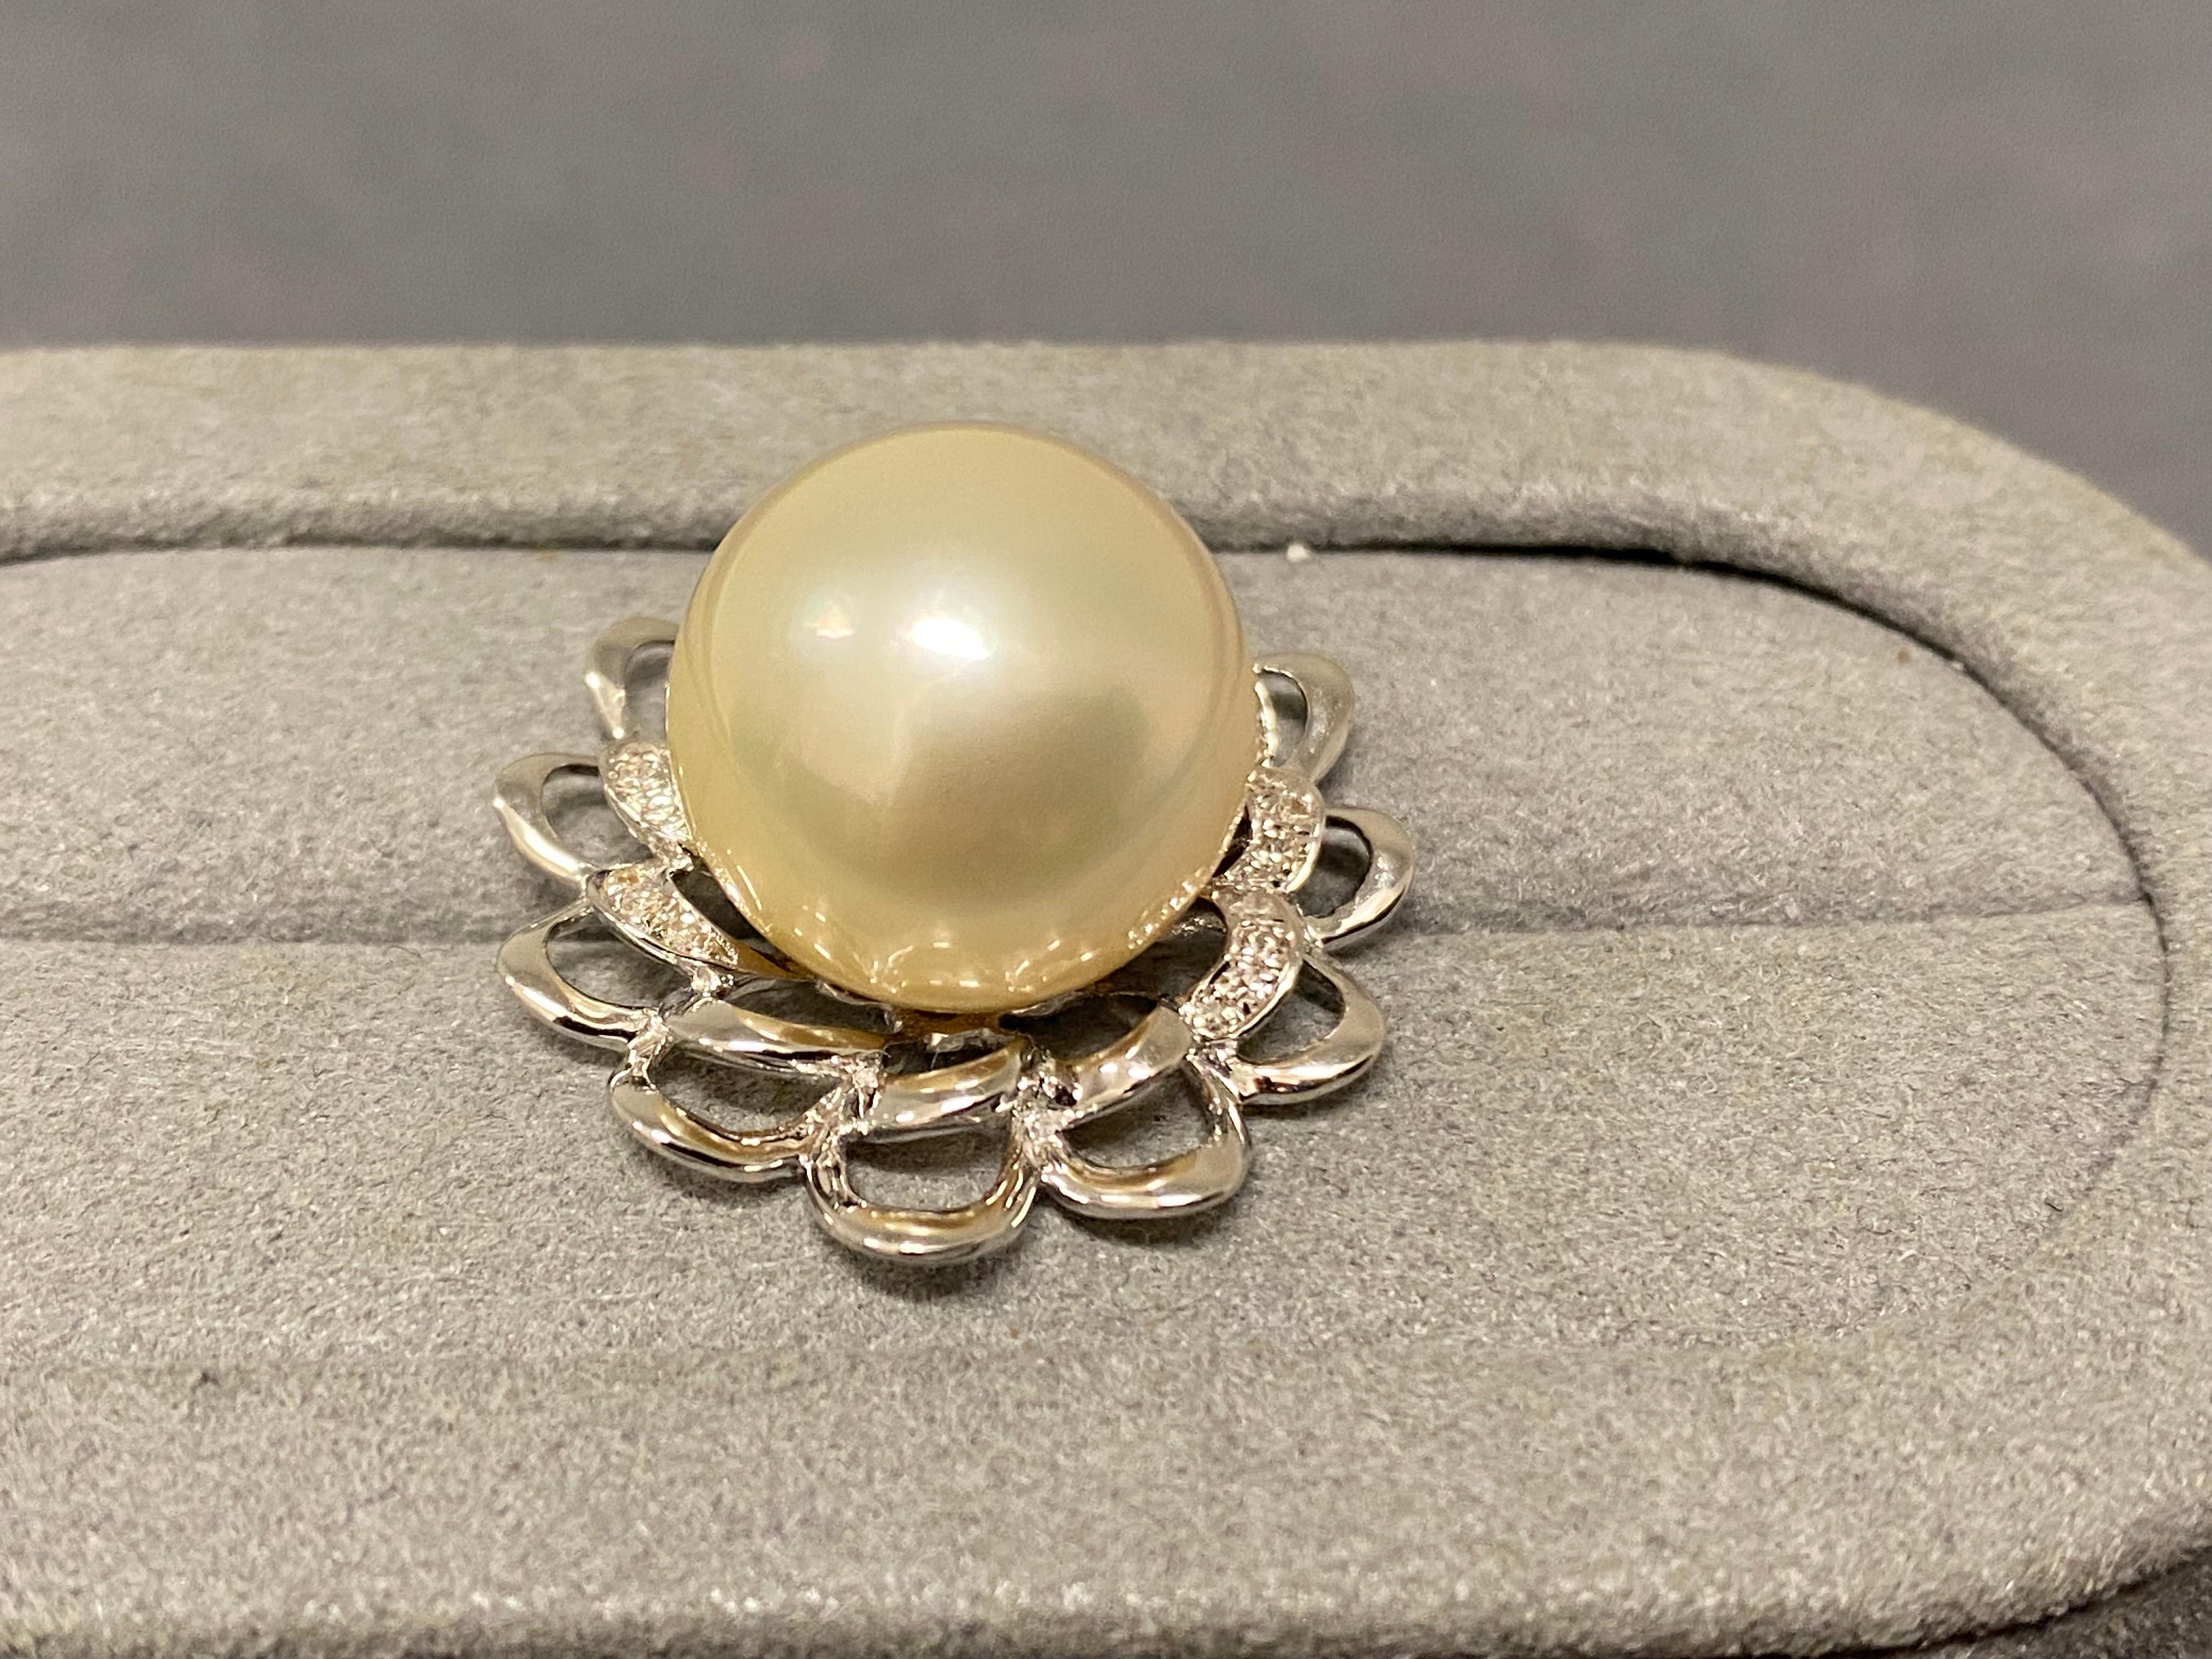 A 13.7 mm south sea pearl and diamond pendant in 18k white gold. The pearl is set in the middle of a daisy-like flower motif and some of the petals are set with micro diamonds. The south sea pearl is light champagne in colour with green overtone.